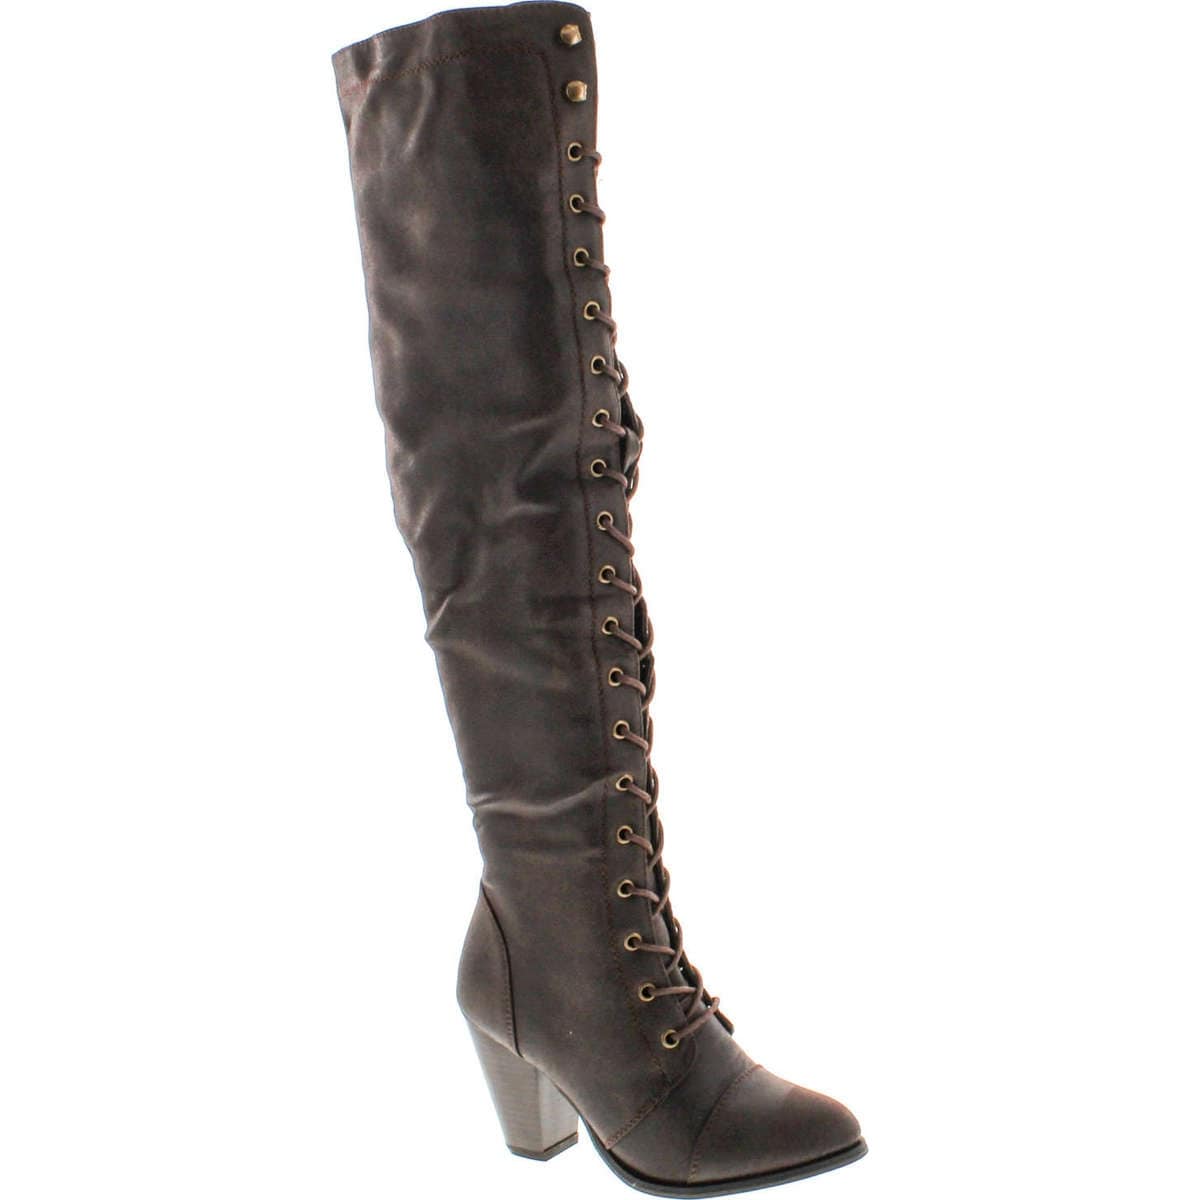 women's lace up boots with heel